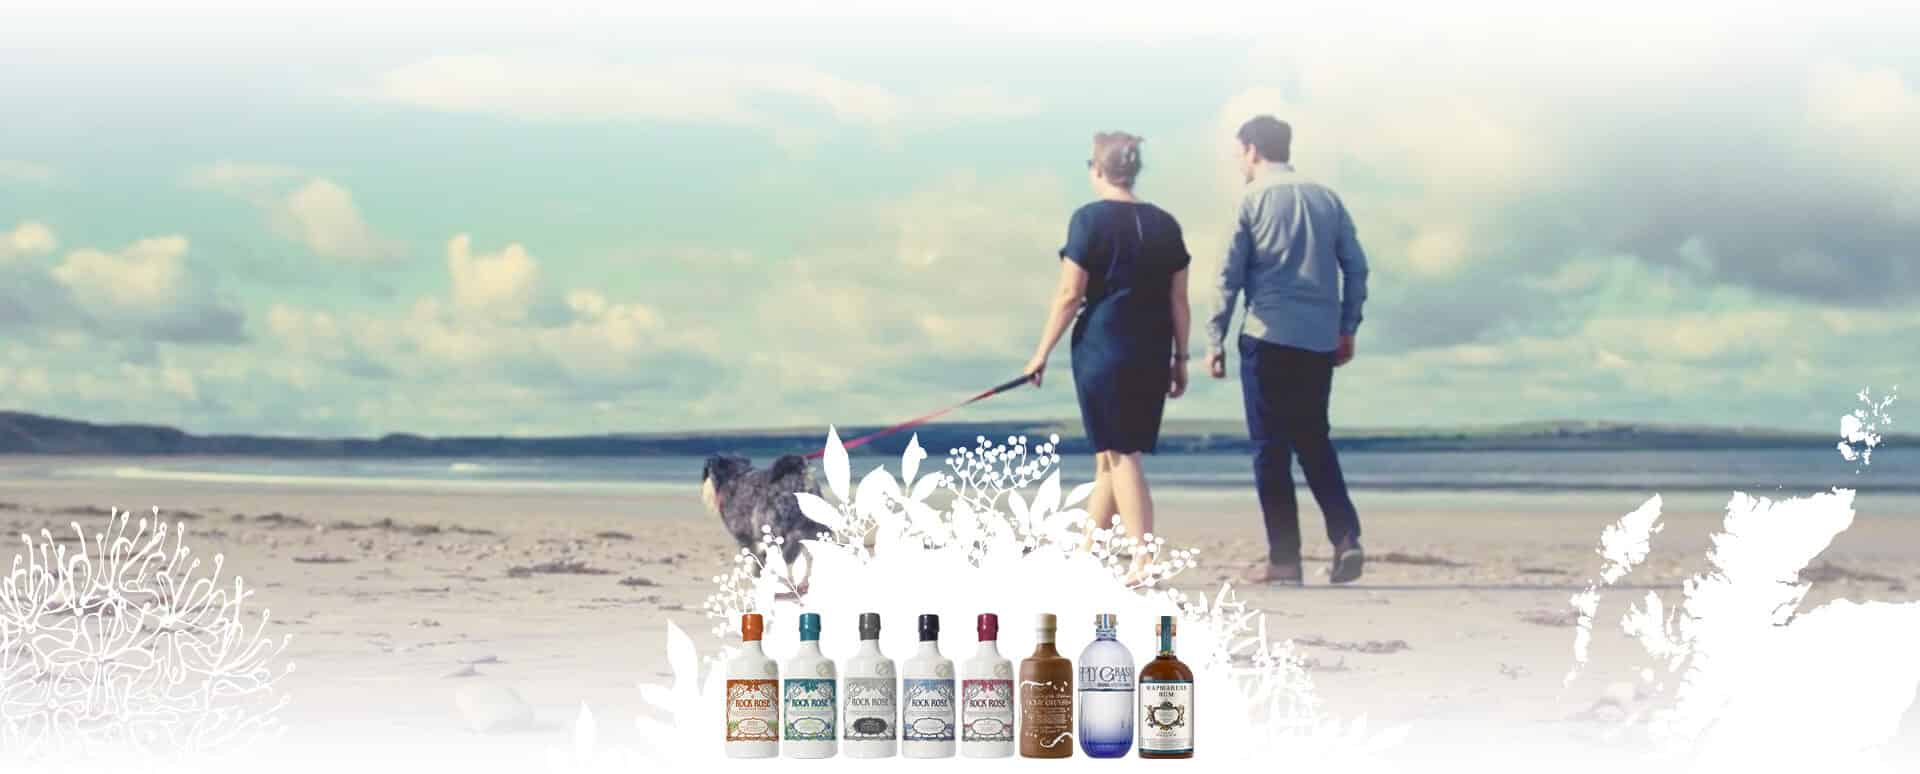 Dunnet Bay Distillers spirits bottles lined-up with Claire and Martin Murray walking with dog on Dunnet Bay beach in the background